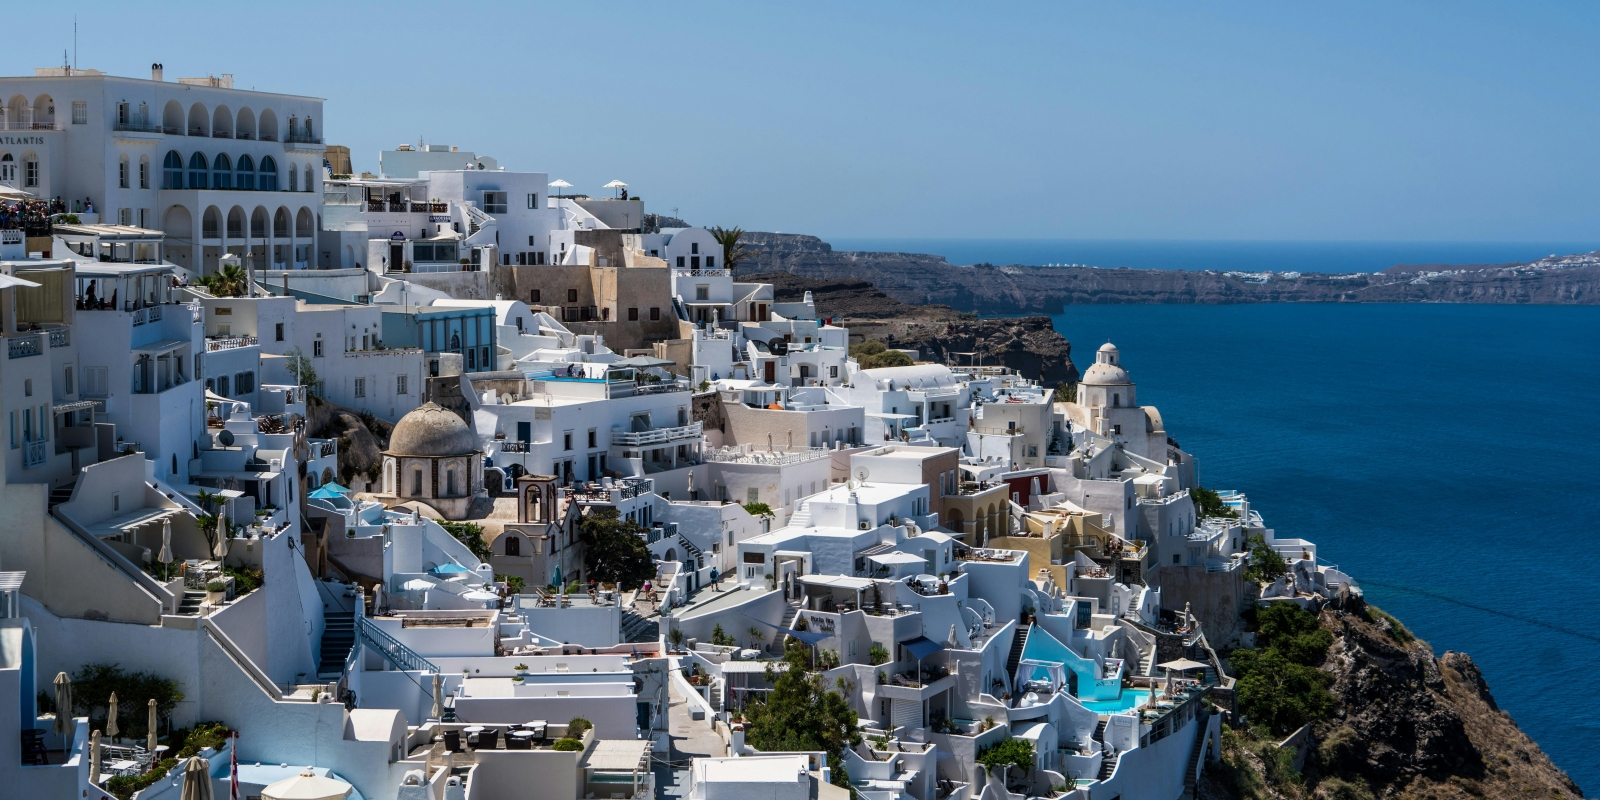 The procedure for buying a property in Greece